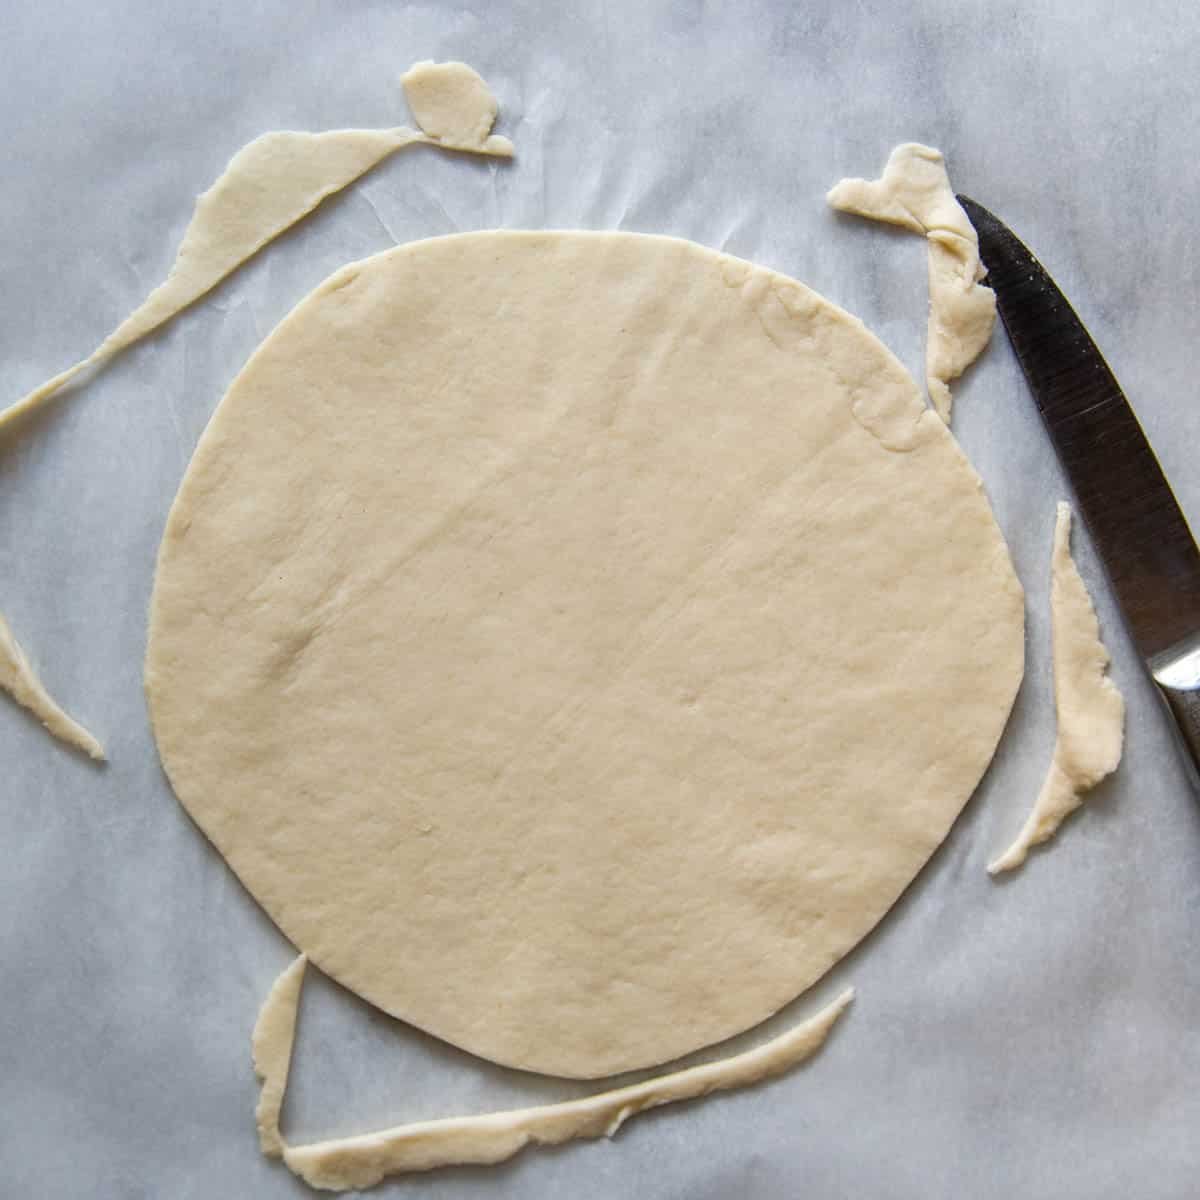 the edges cut off to make a perfect circle.